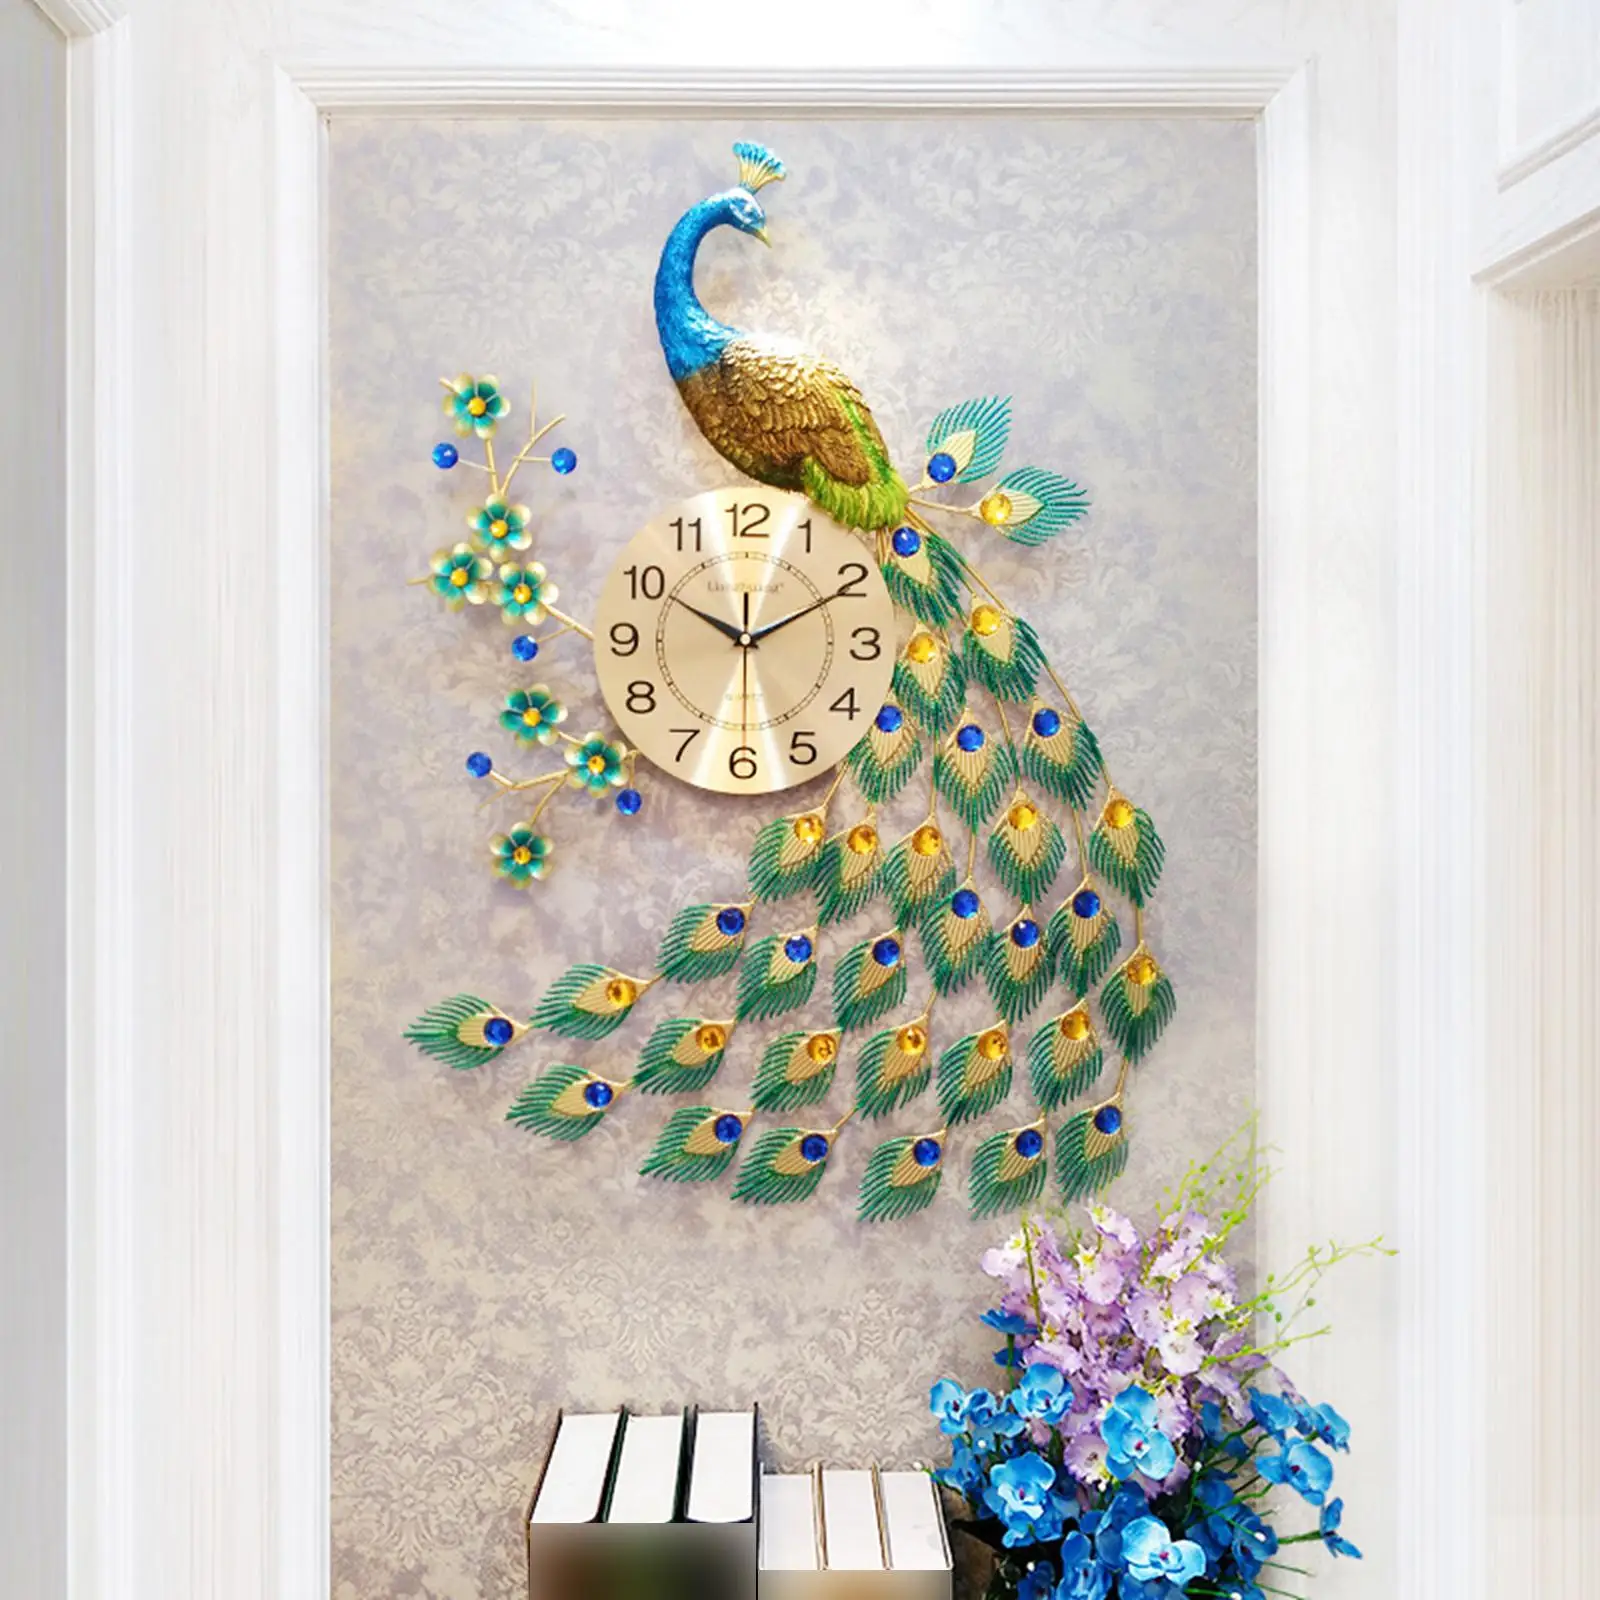 Modern Peacock Wall Clock Silent Non Ticking for Restaurant Dining Room Cafe